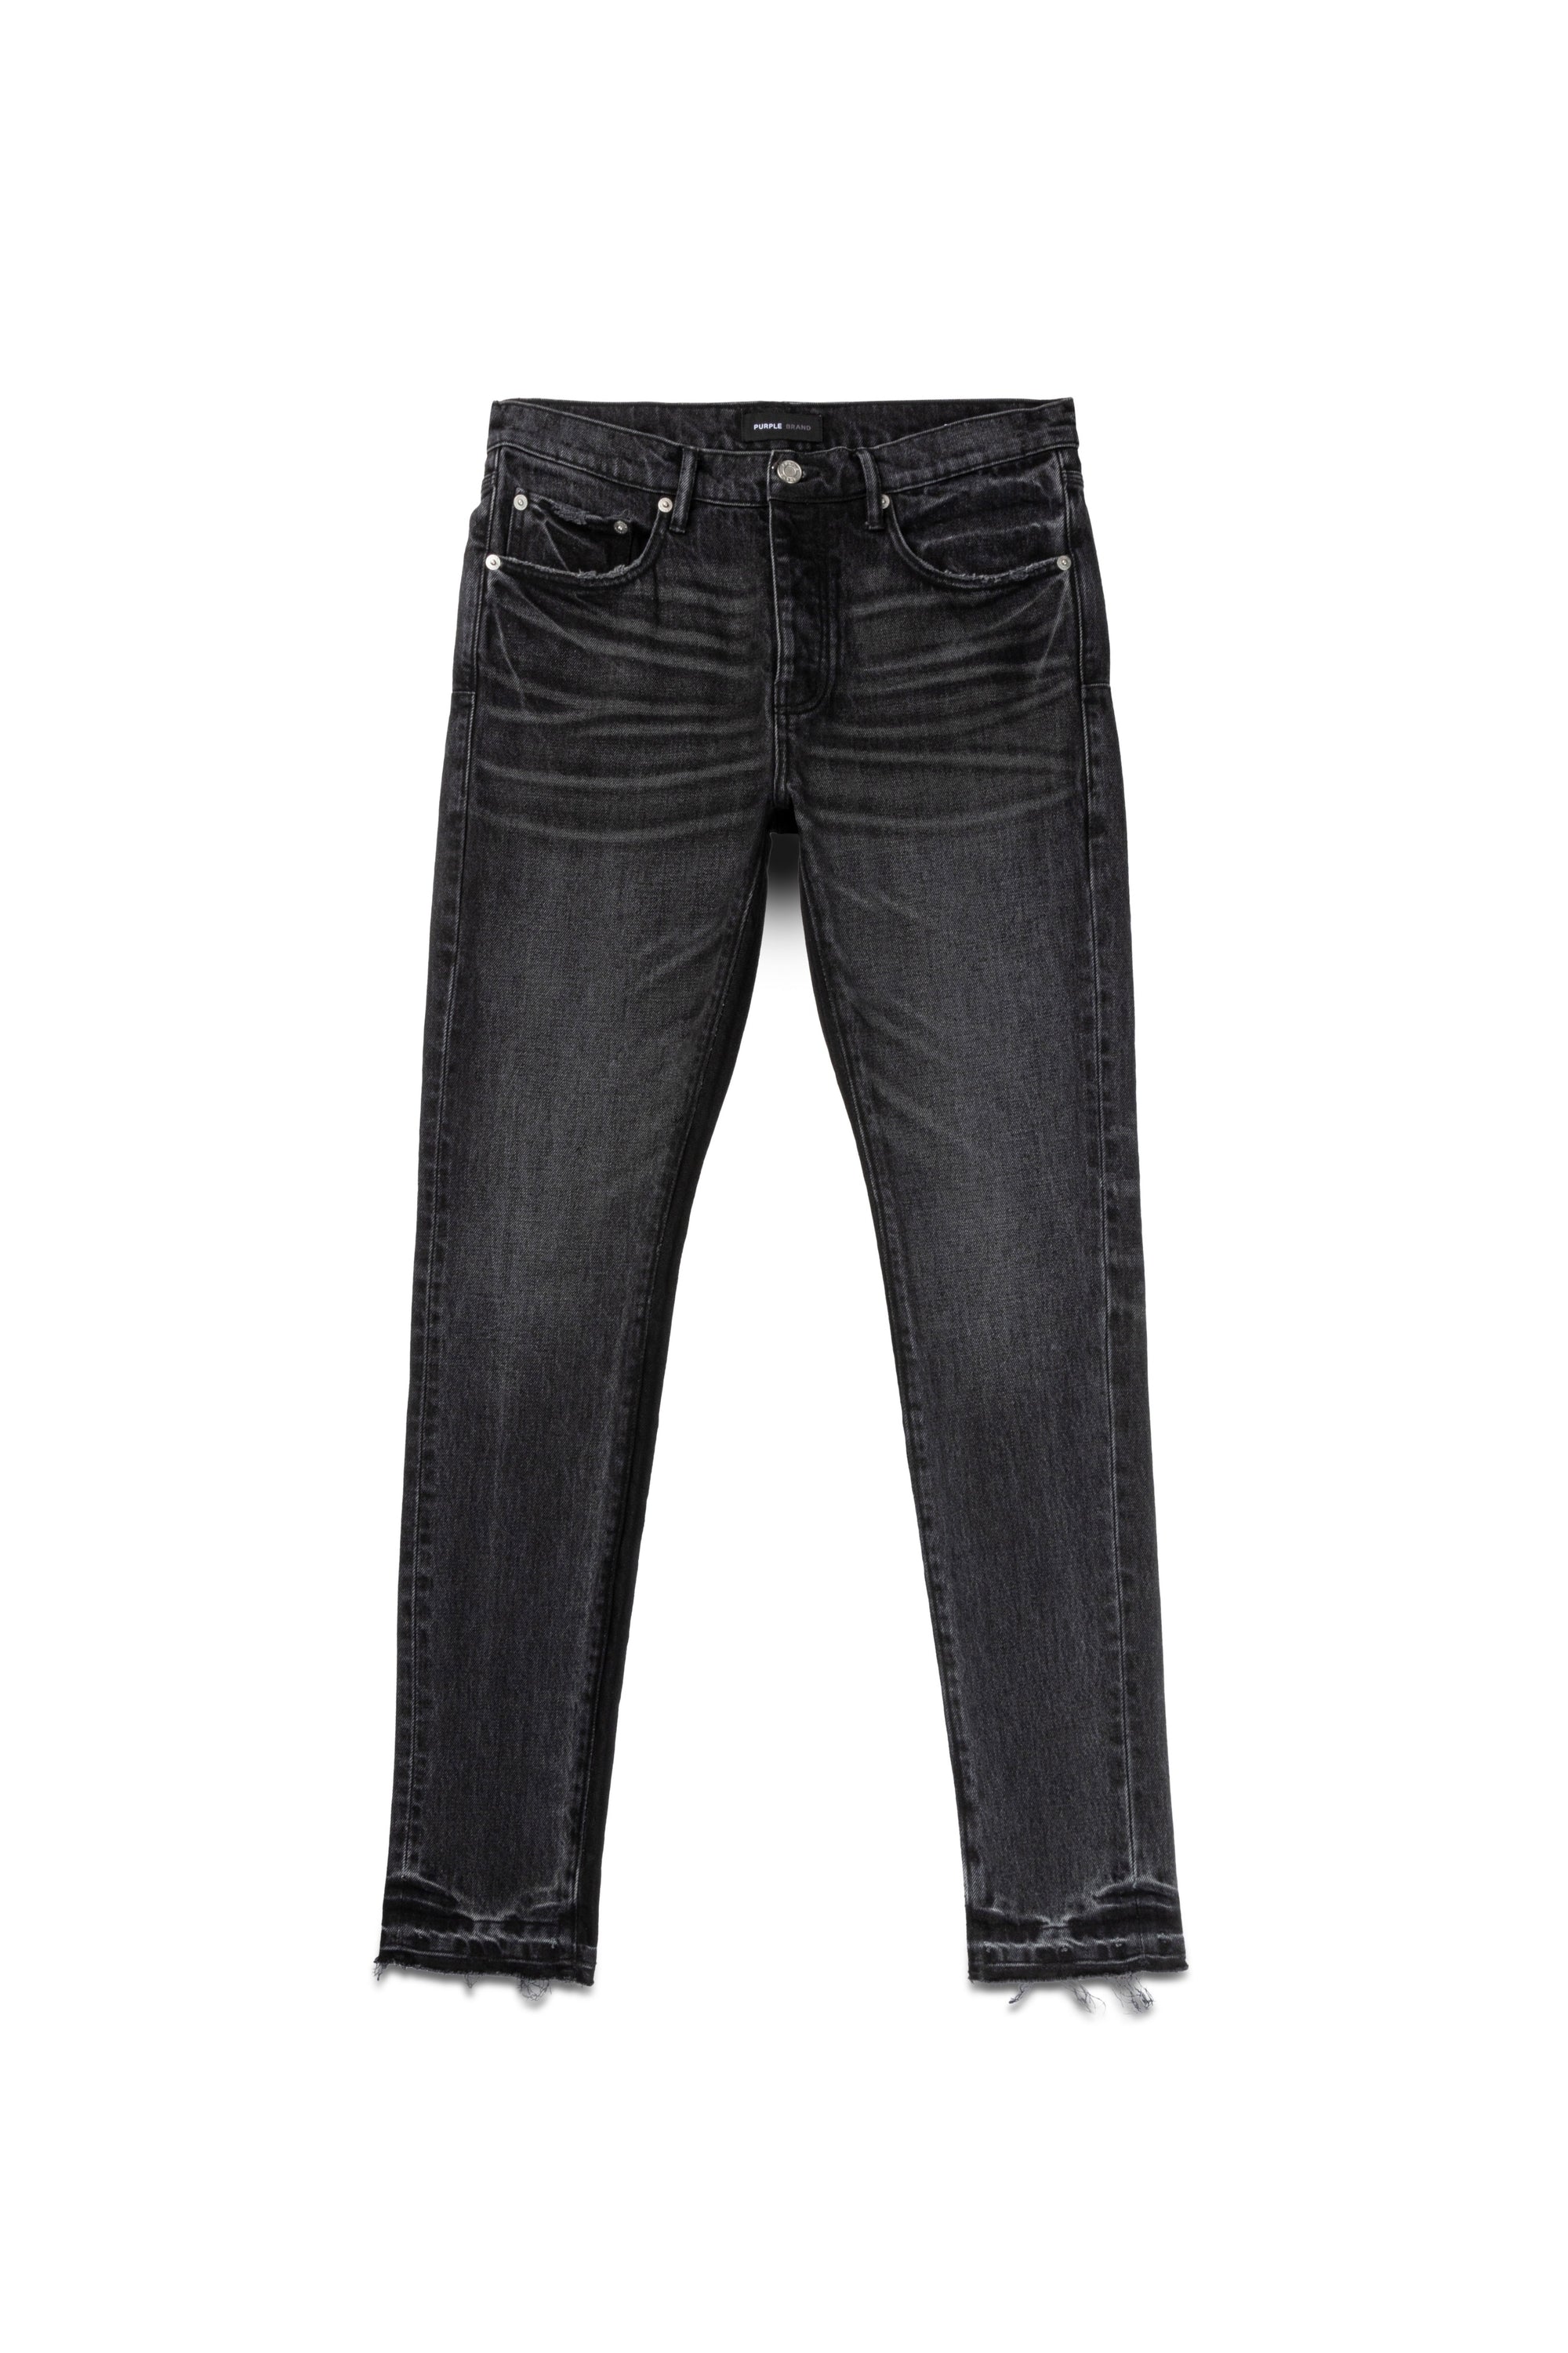 Purple Brand Dropped Mid Rise Tapered Jeans - LIGHT INDIGO BLOWOUT -  Civilized Nation - Official Site